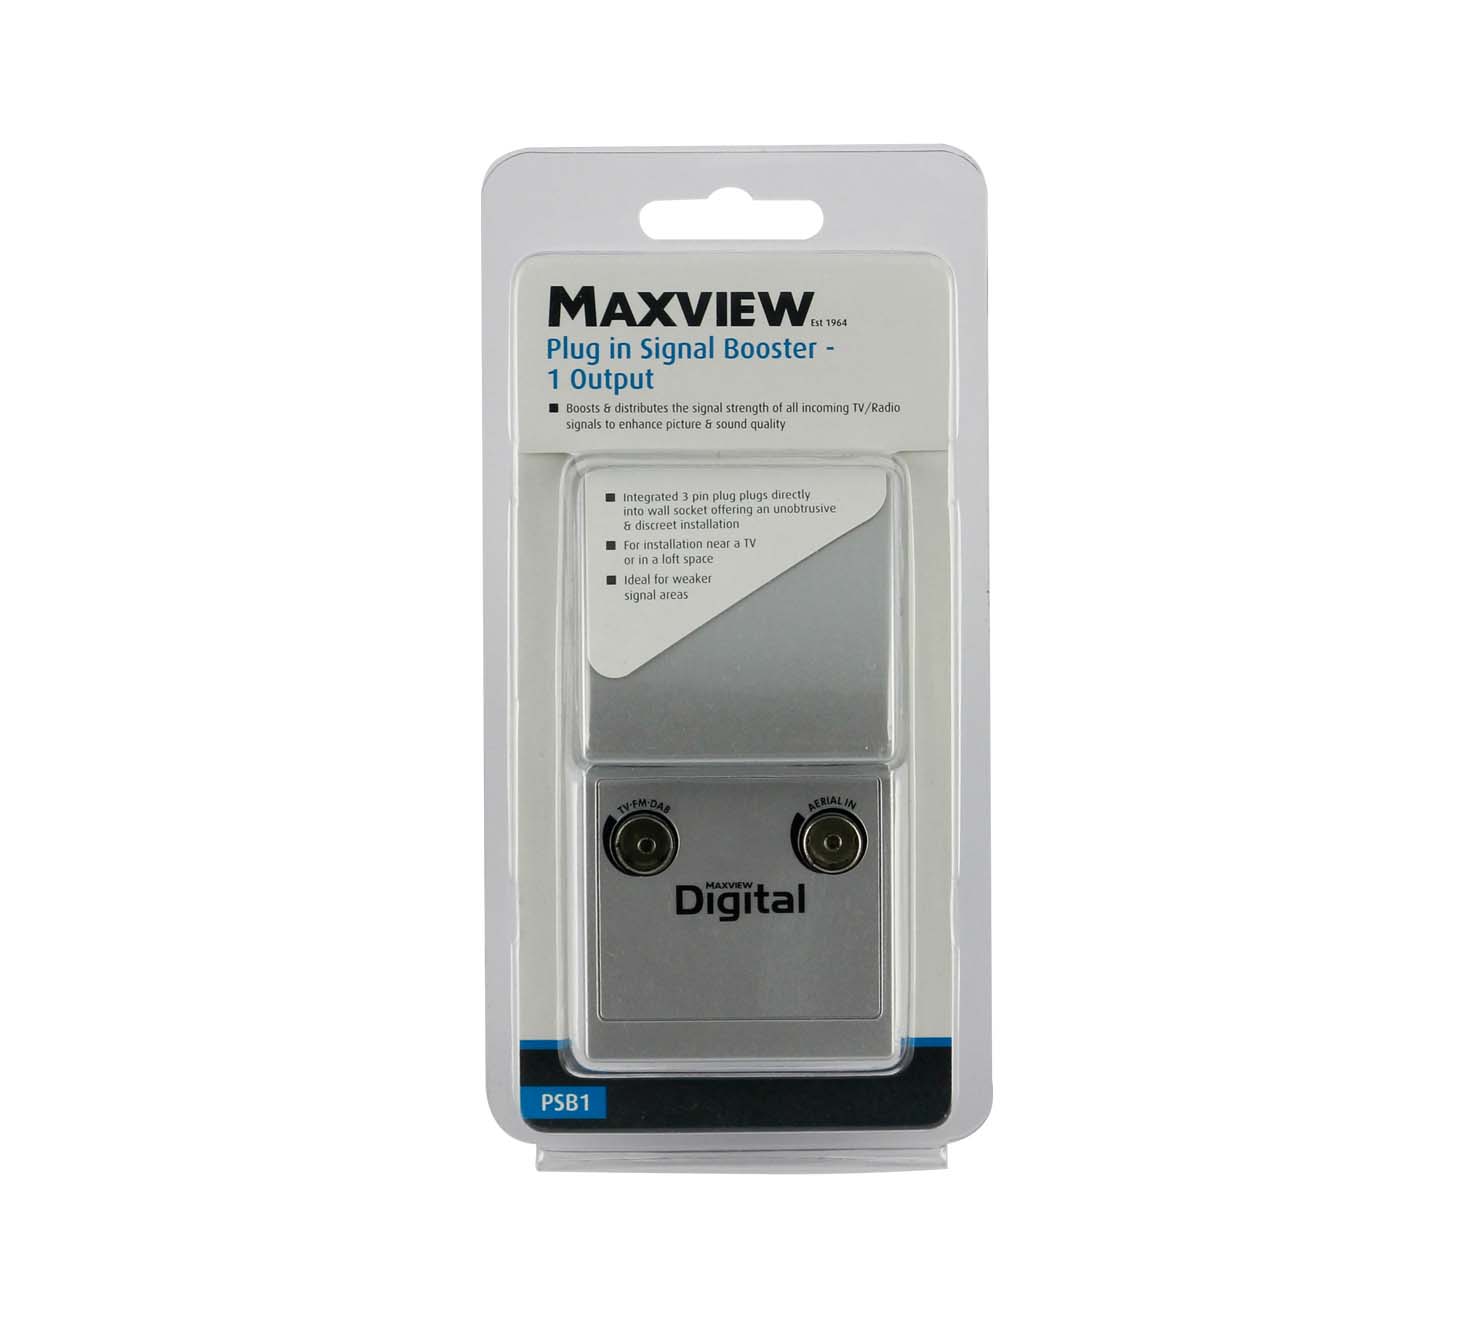 MAXVIEW PSB2C 2 ROOM PLUG IN DIGITAL SIGNAL BOOSTERS